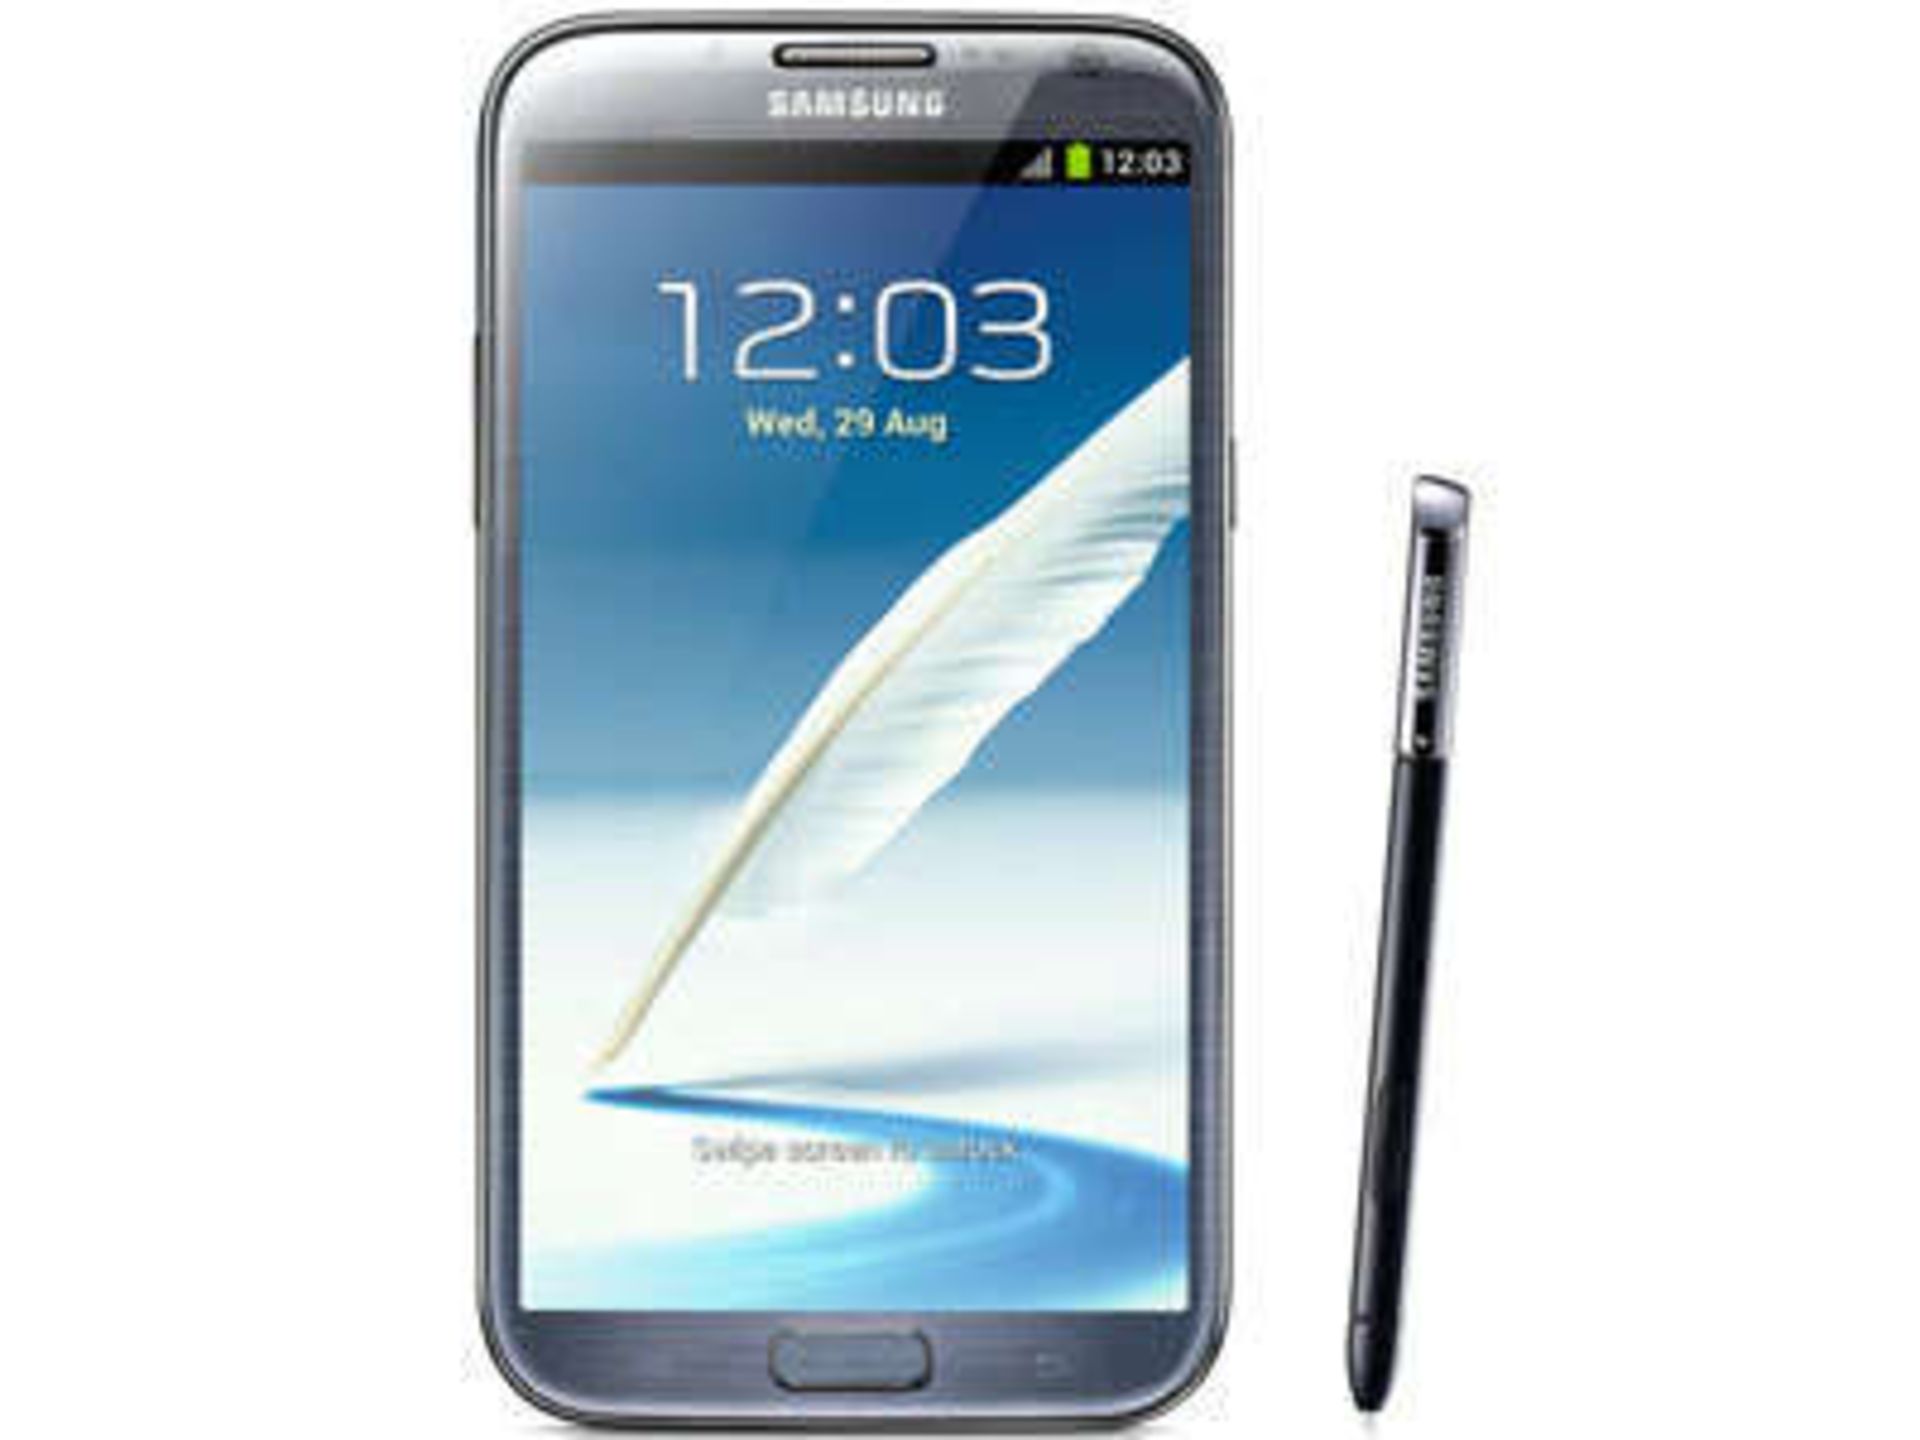 No VAT Grade A Samsung Note 2(N7100) Colours May Vary - Item Available After Approx 15 Working Days